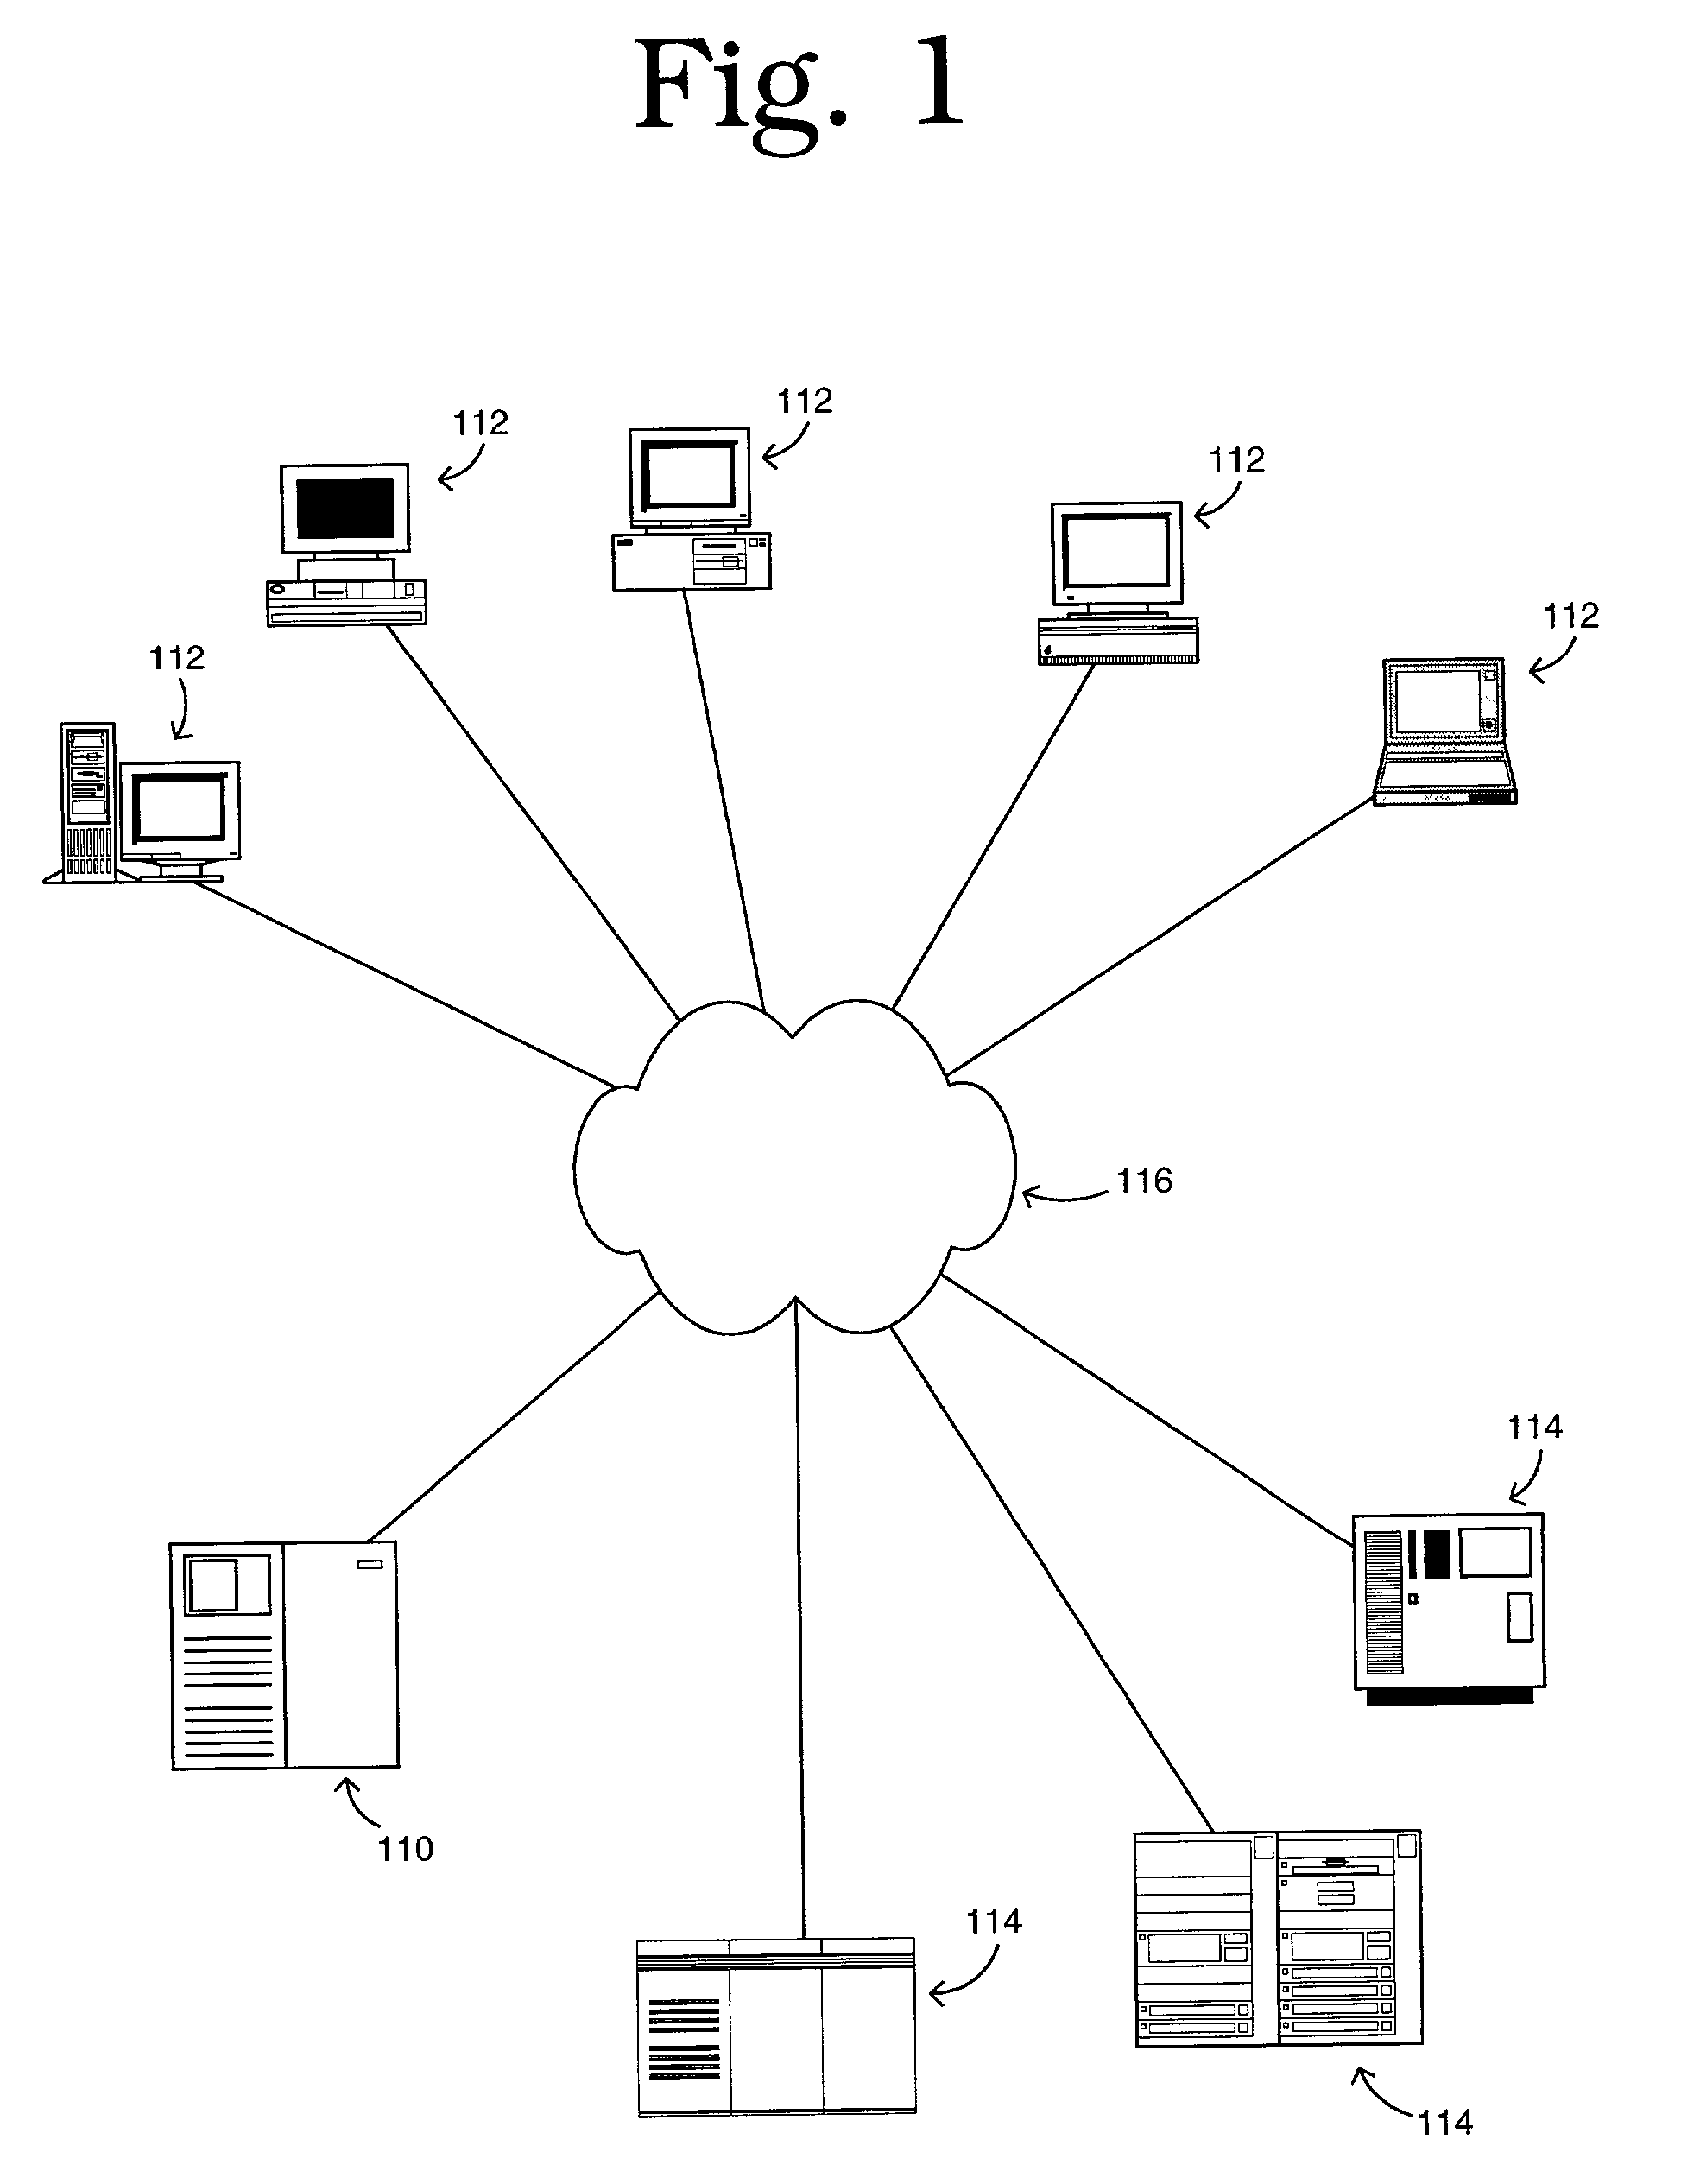 System and method for providing discriminated content to network users